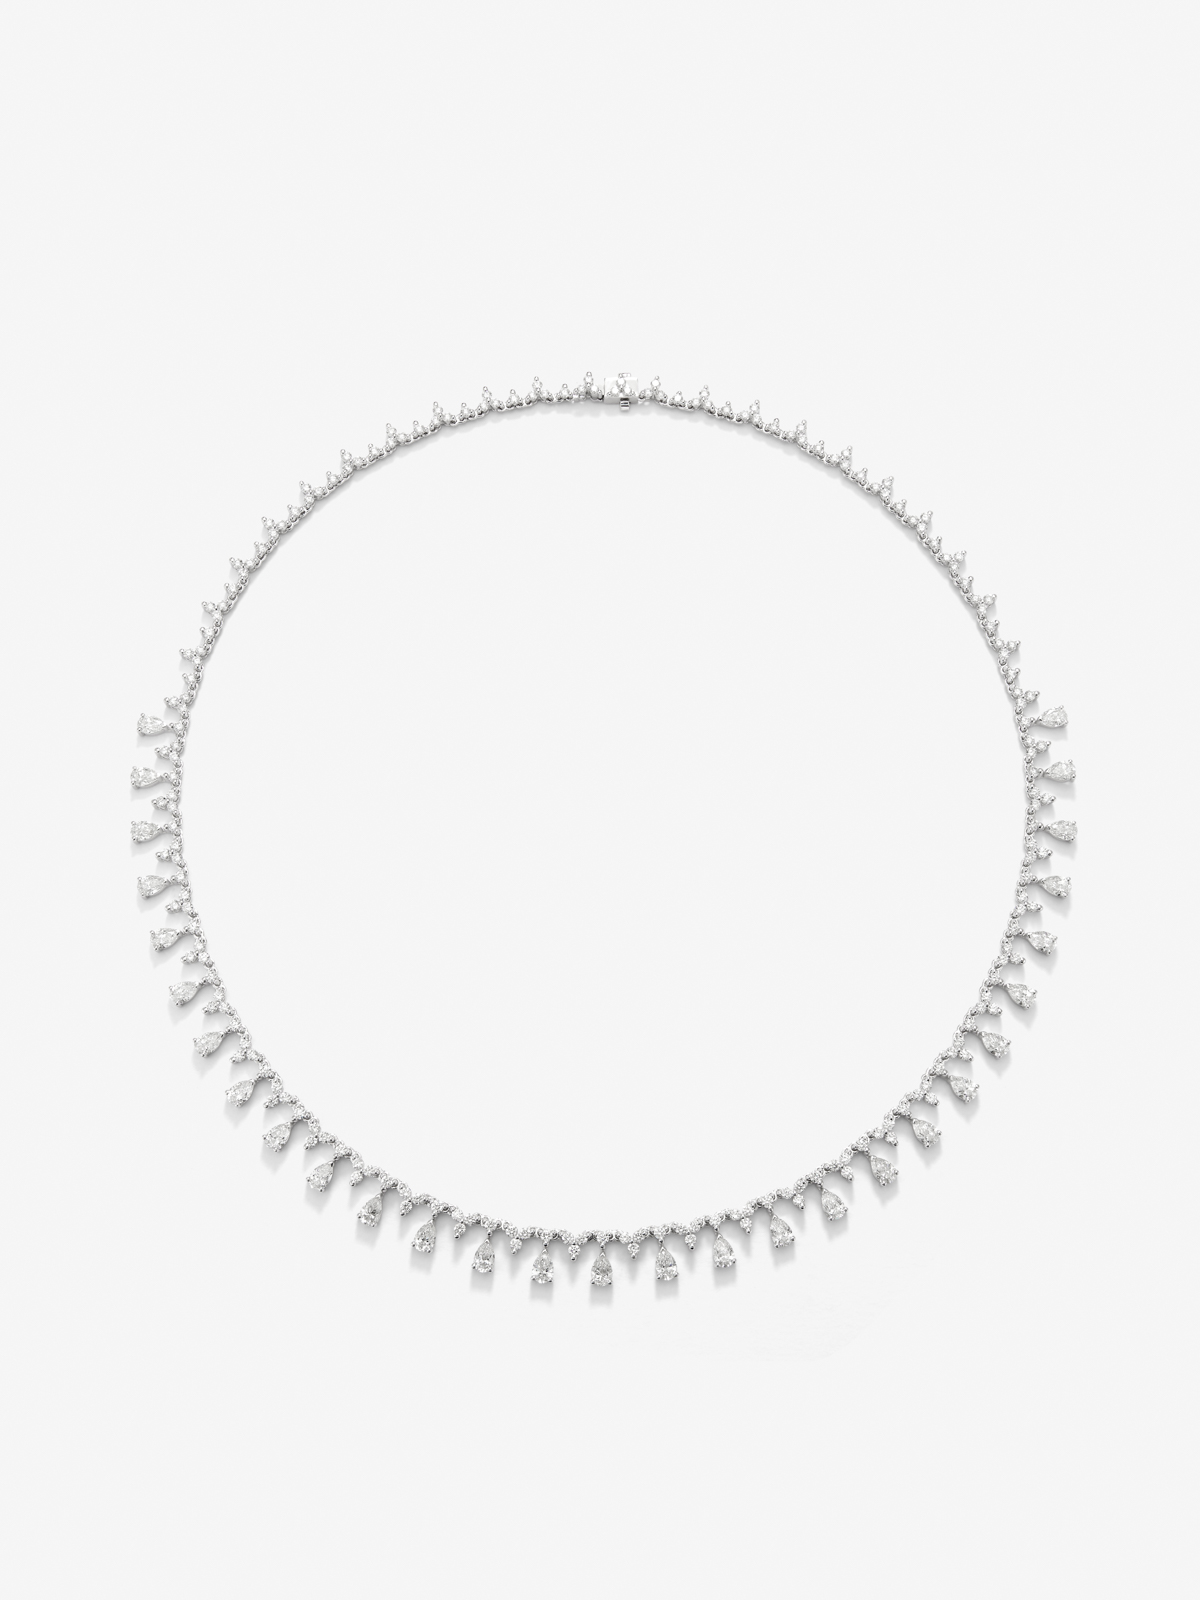 18K White Gold Rivière Collar with white and bright white diamonds of 5.57 cts